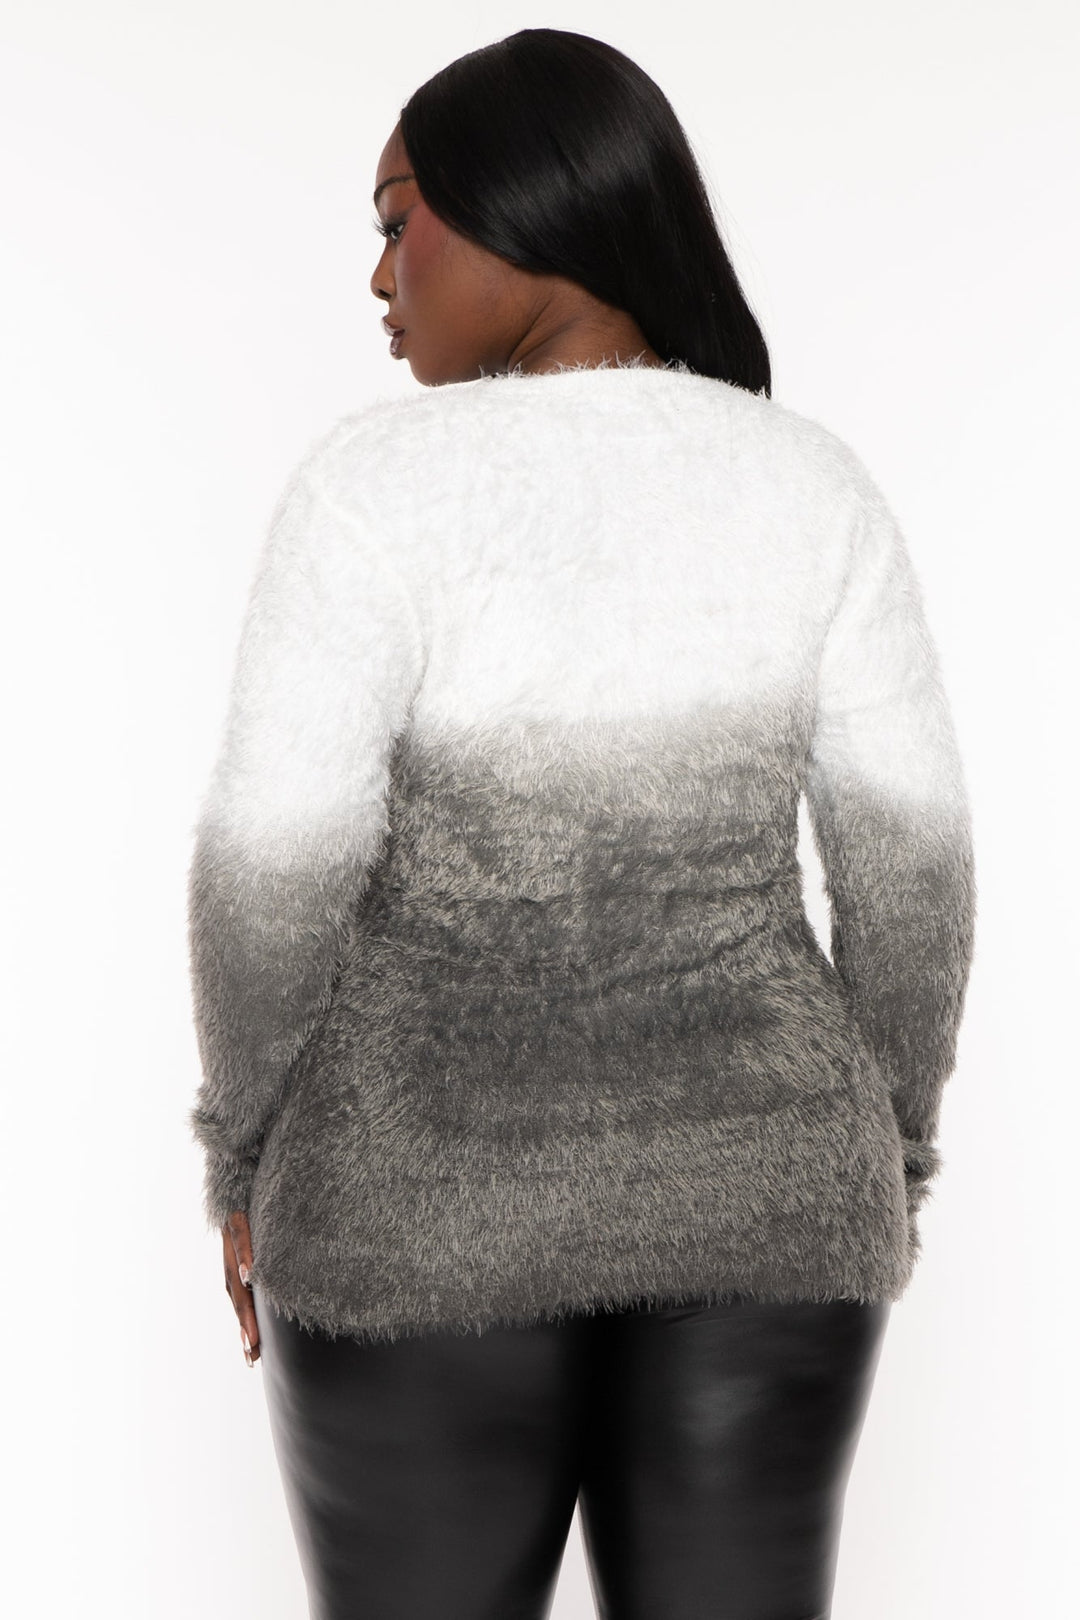 Doe & Rae Sweaters & Cardigans Plus Size Ombre Fuzzy  Sweater - Ivory/Grey